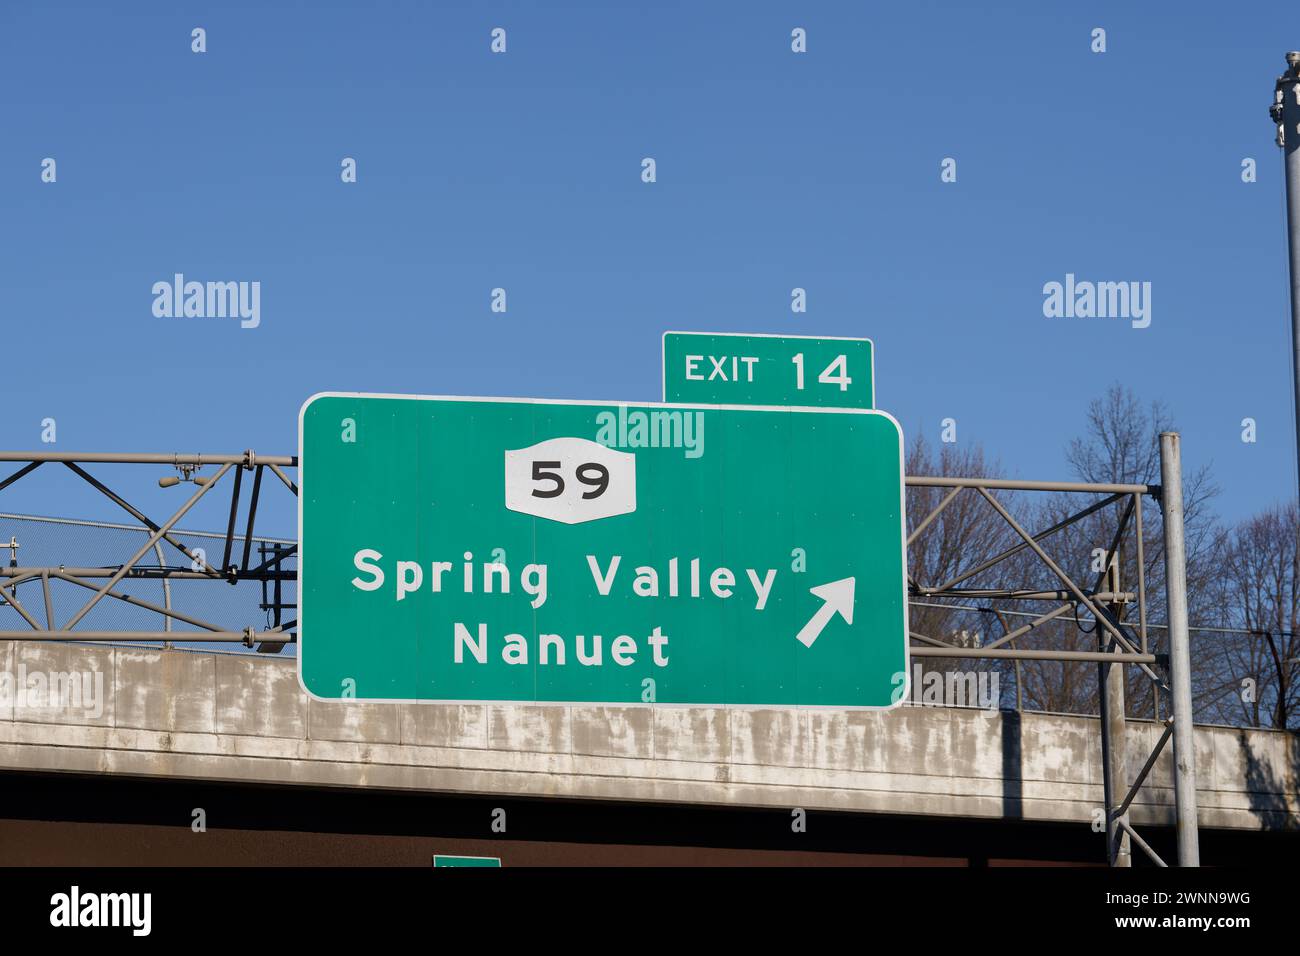 sign on I-287 I-87 NY State Thruway in Nanuet, New York for Exit 14 for NY-59 to Spring Valley and Nanuet Stock Photo